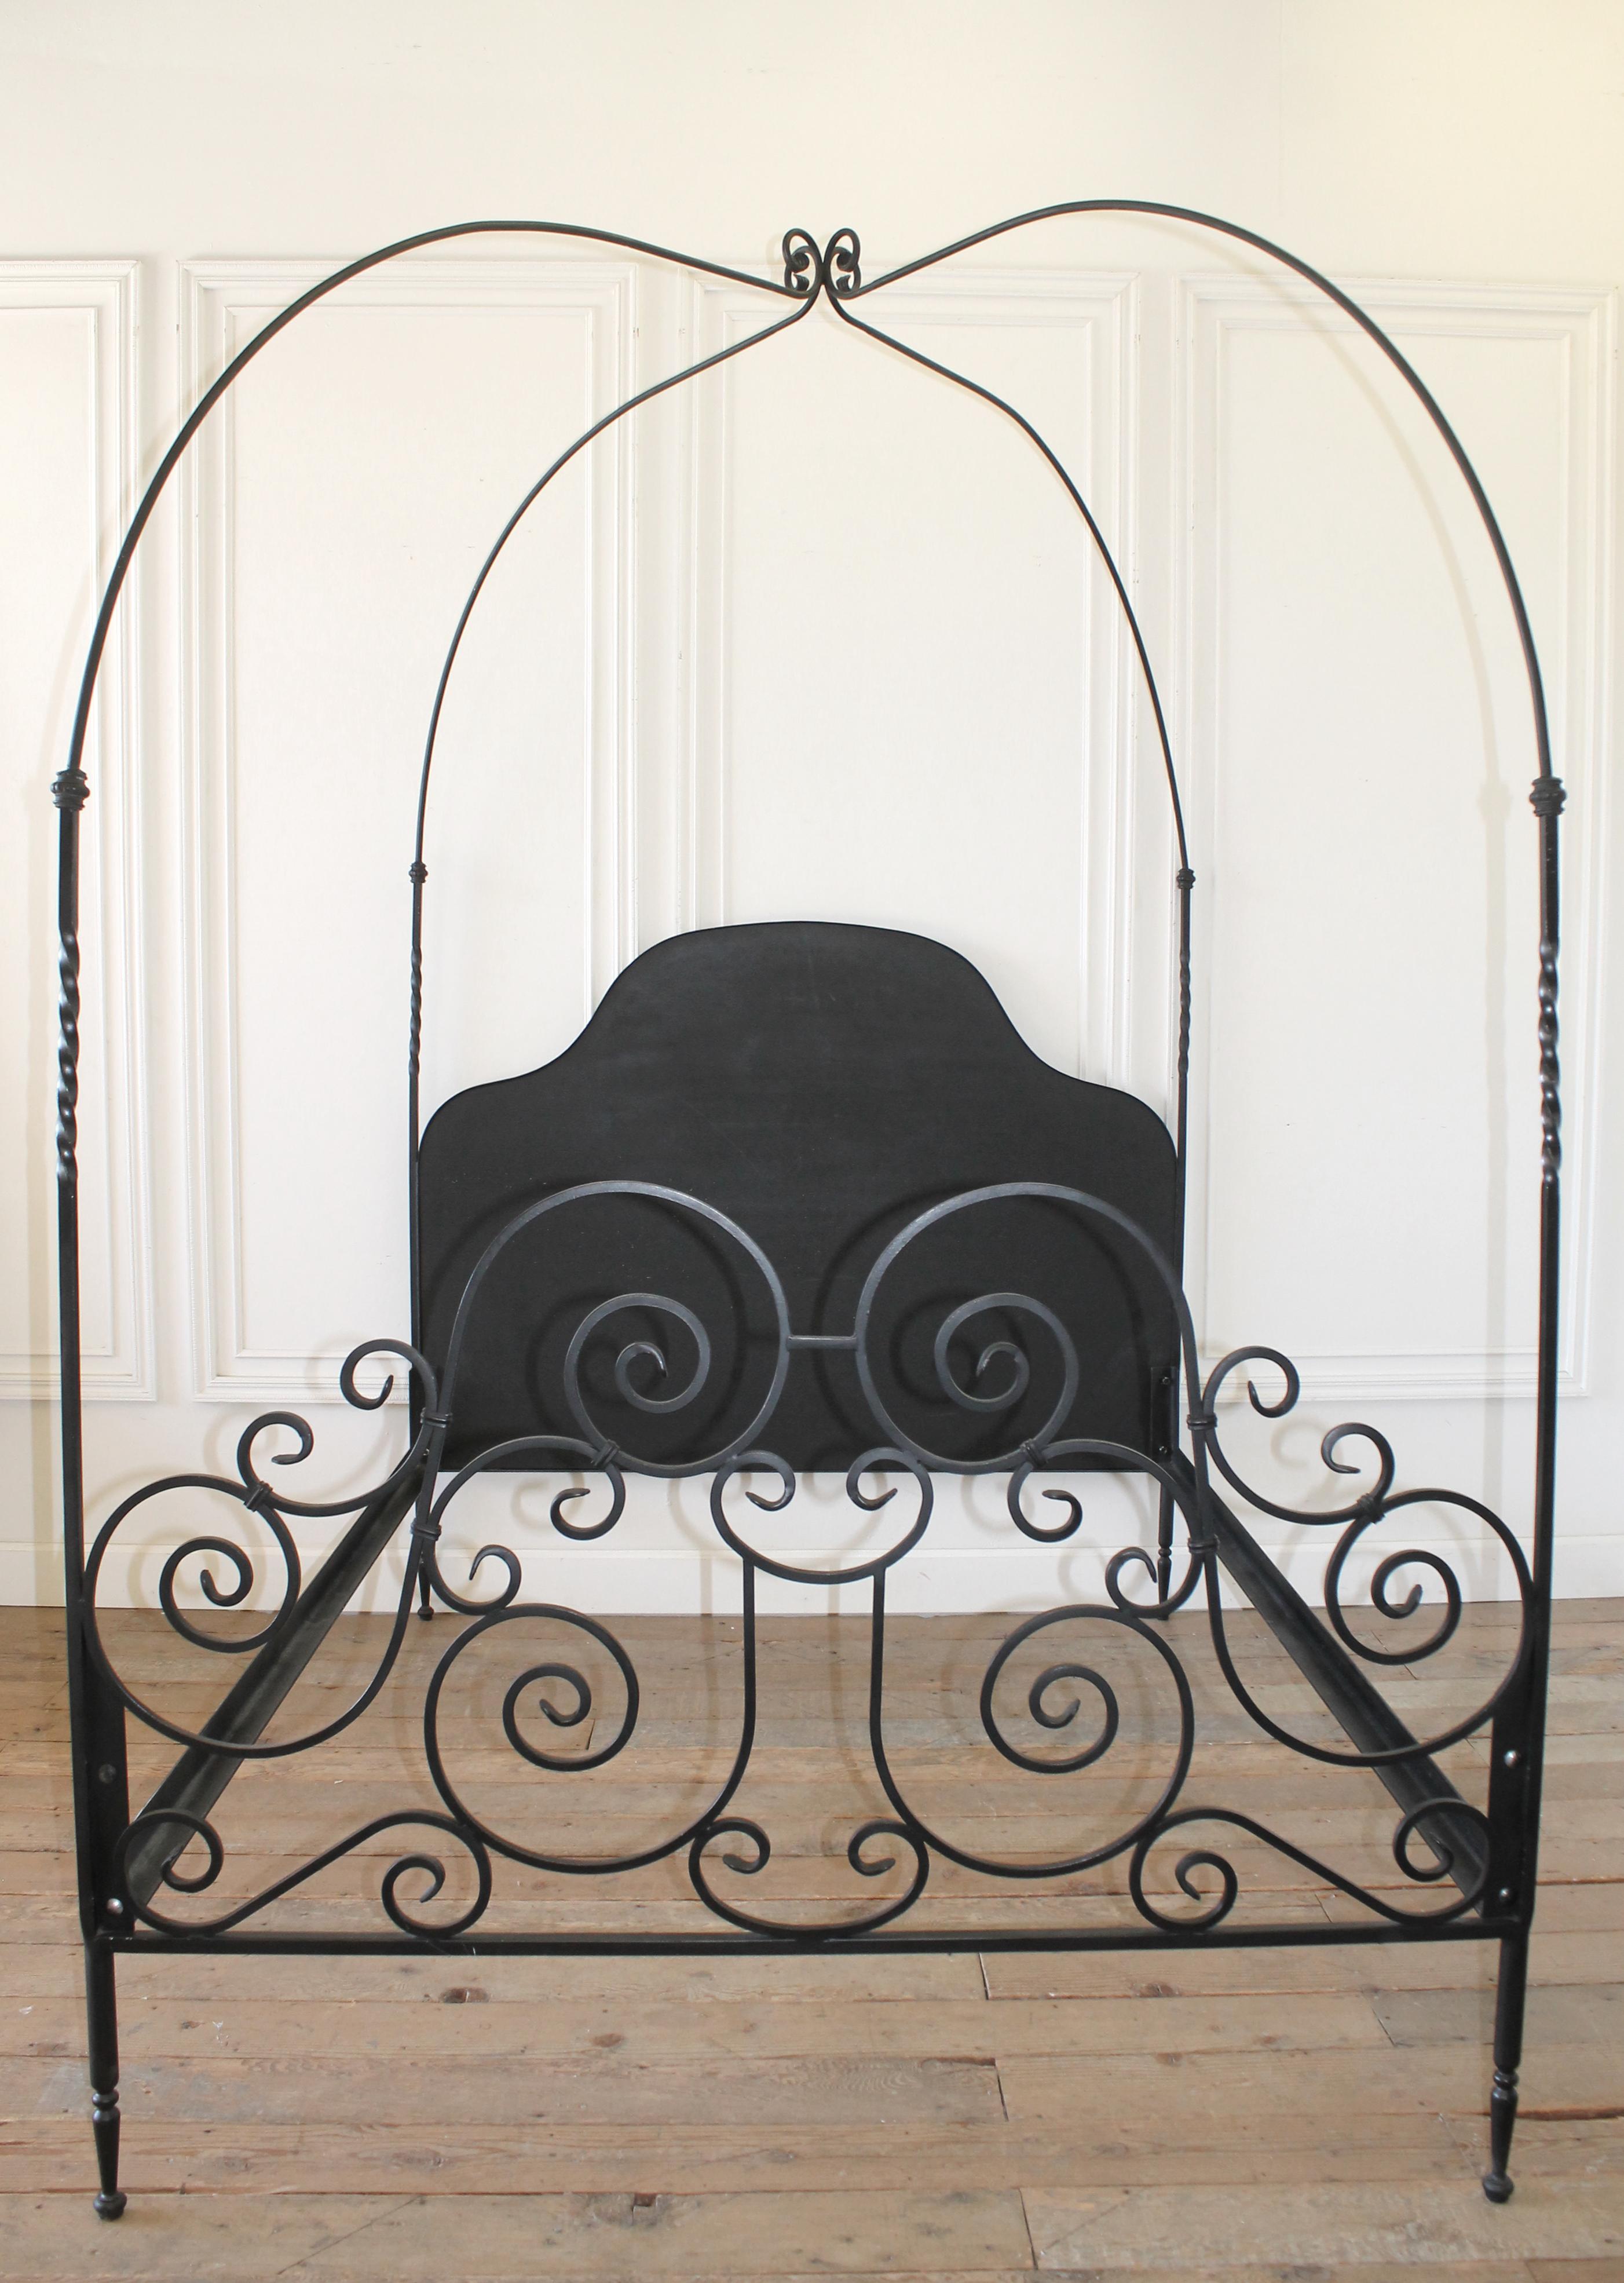 Custom black iron queen size canopy bed
The headboard is wood in the center of the iron frame that can be upholstered for a more custom decorative look.
The bed comes apart as a headboard, footboard, 2 side rails, and canopy.
Very solid and